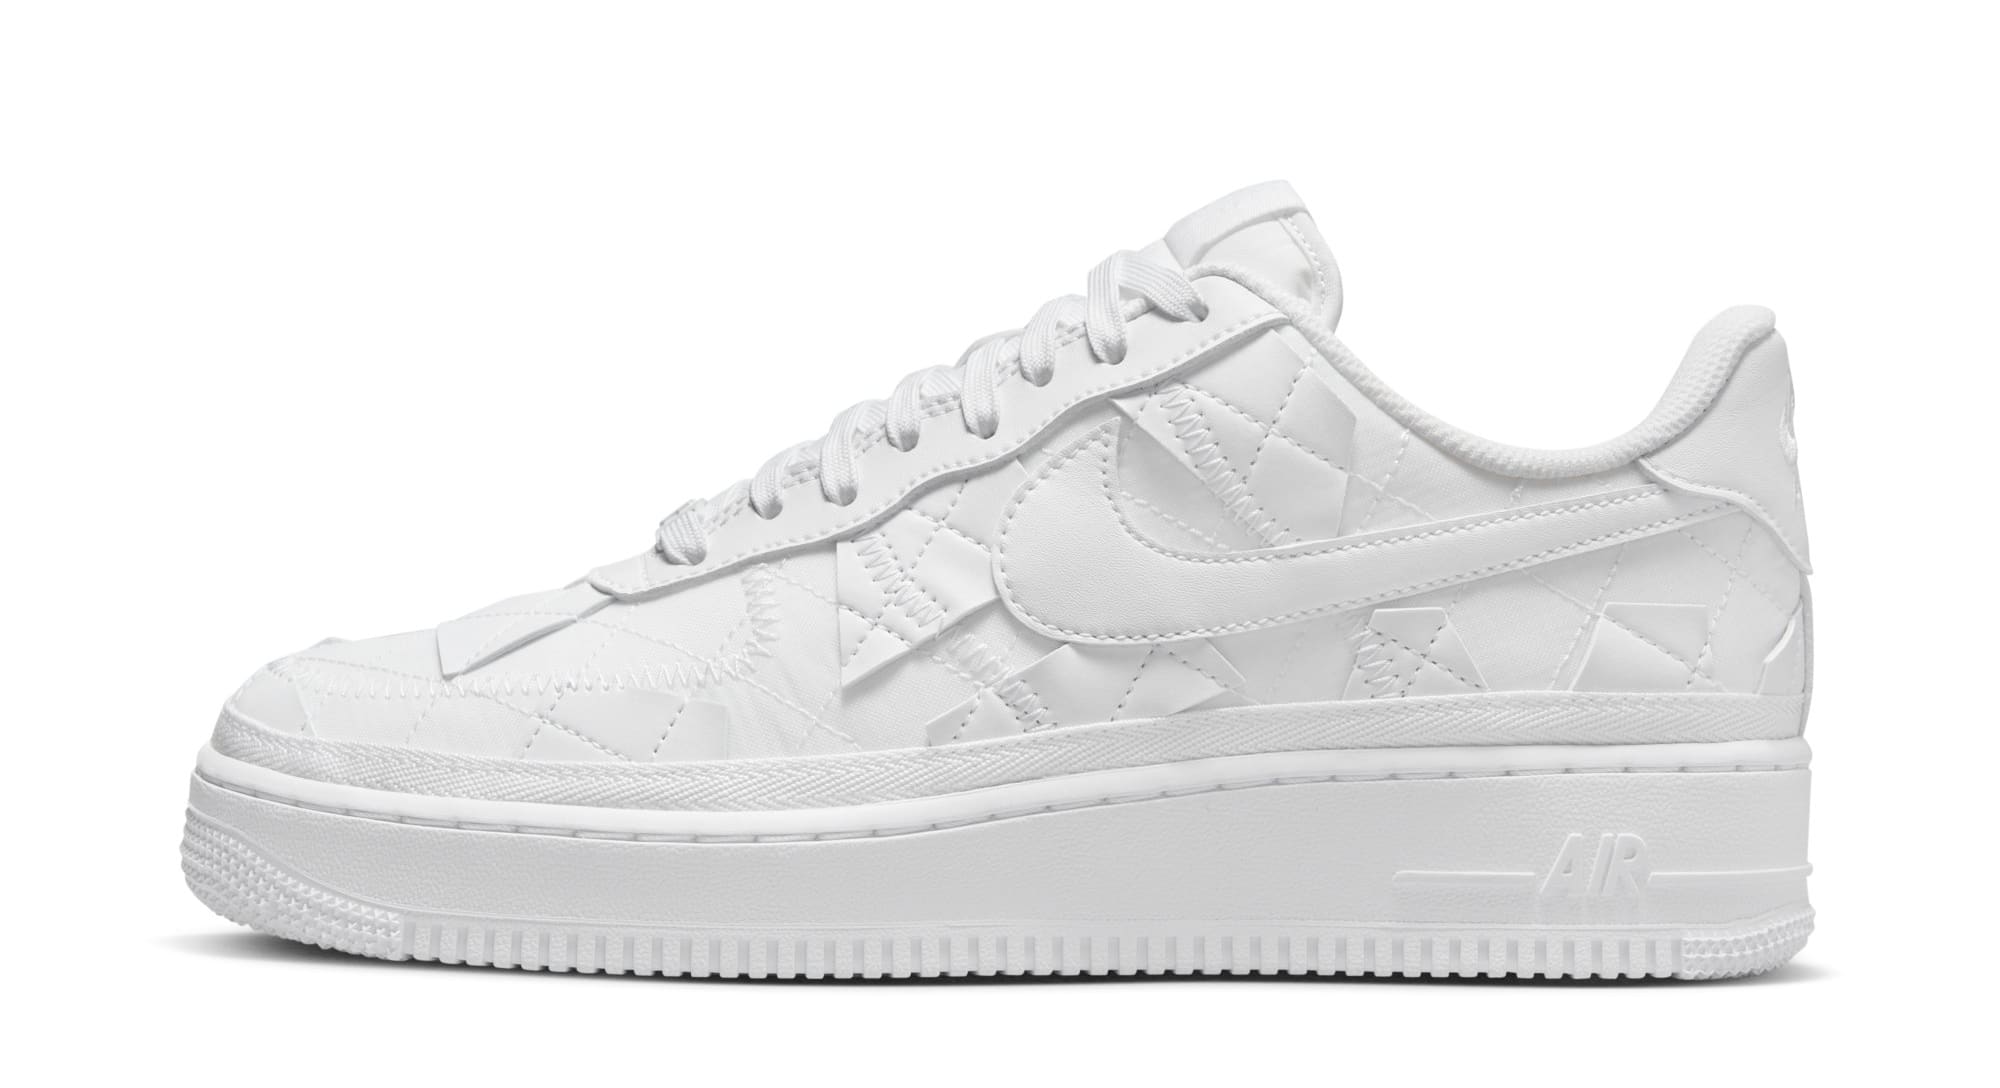 White on White Billie Eilish x Nike Air Force 1 Low Releases This